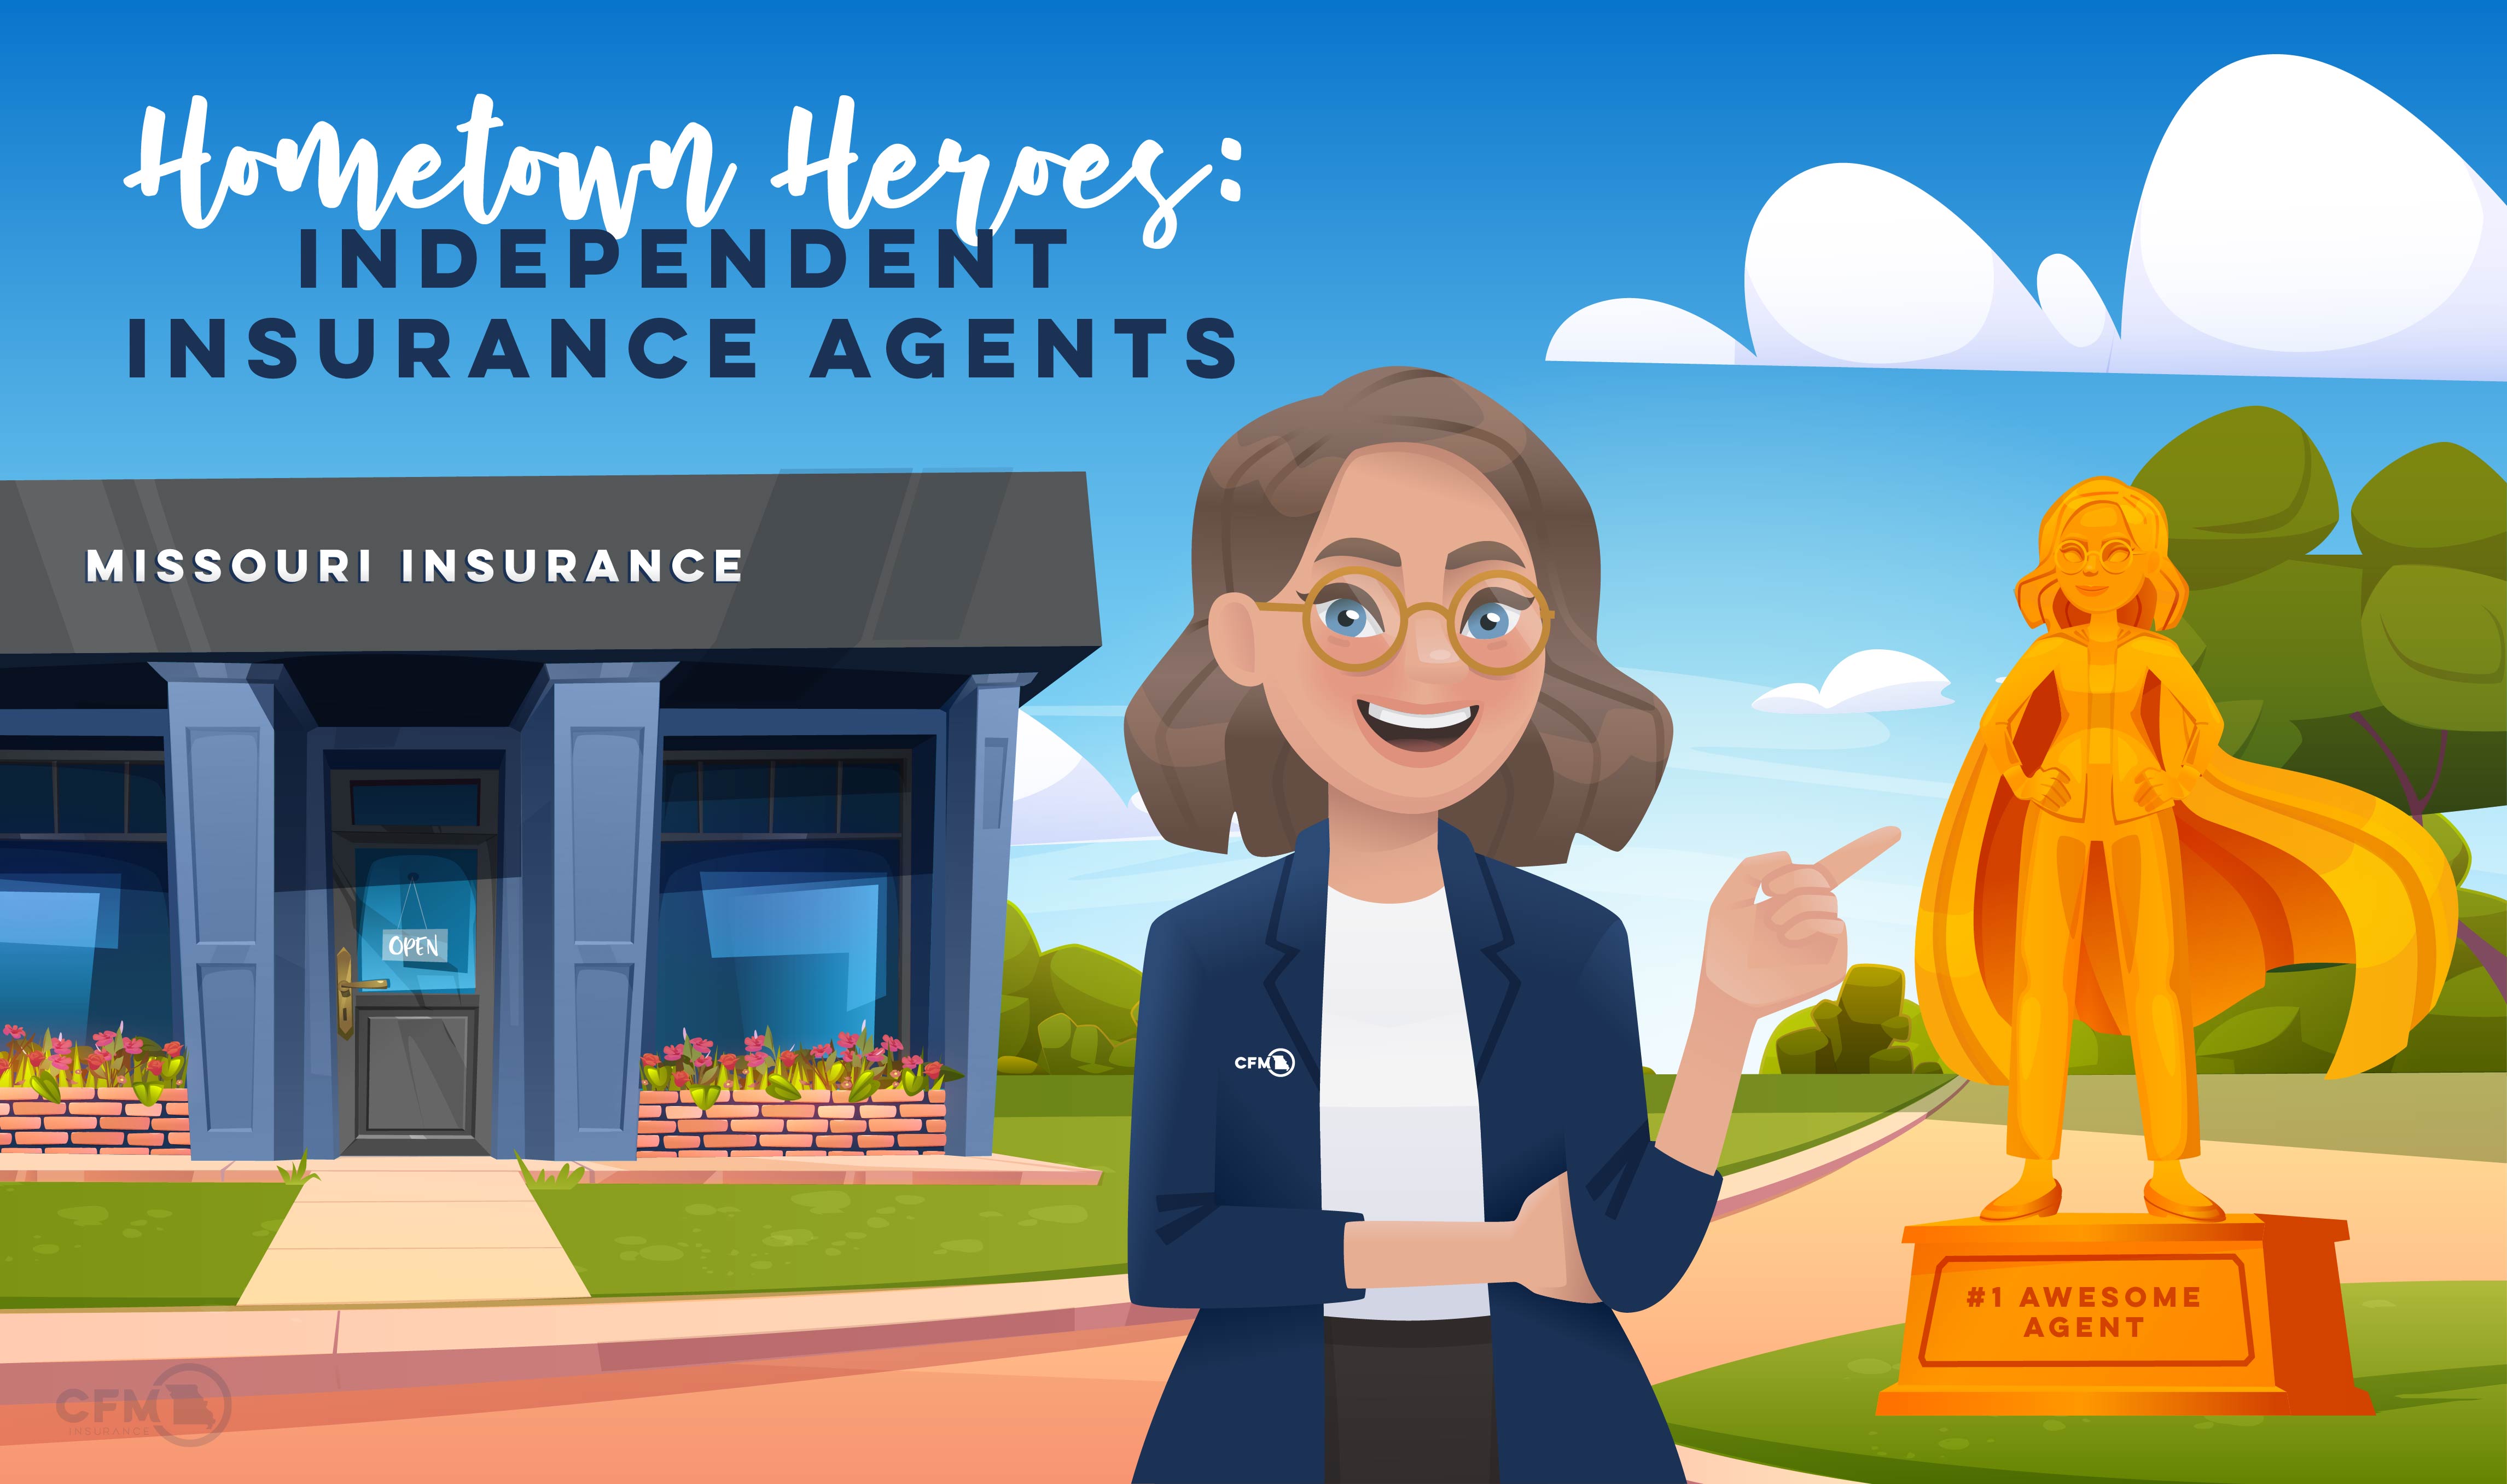 Celebrating Independent Agents and the Mutual Insurance Philosophy